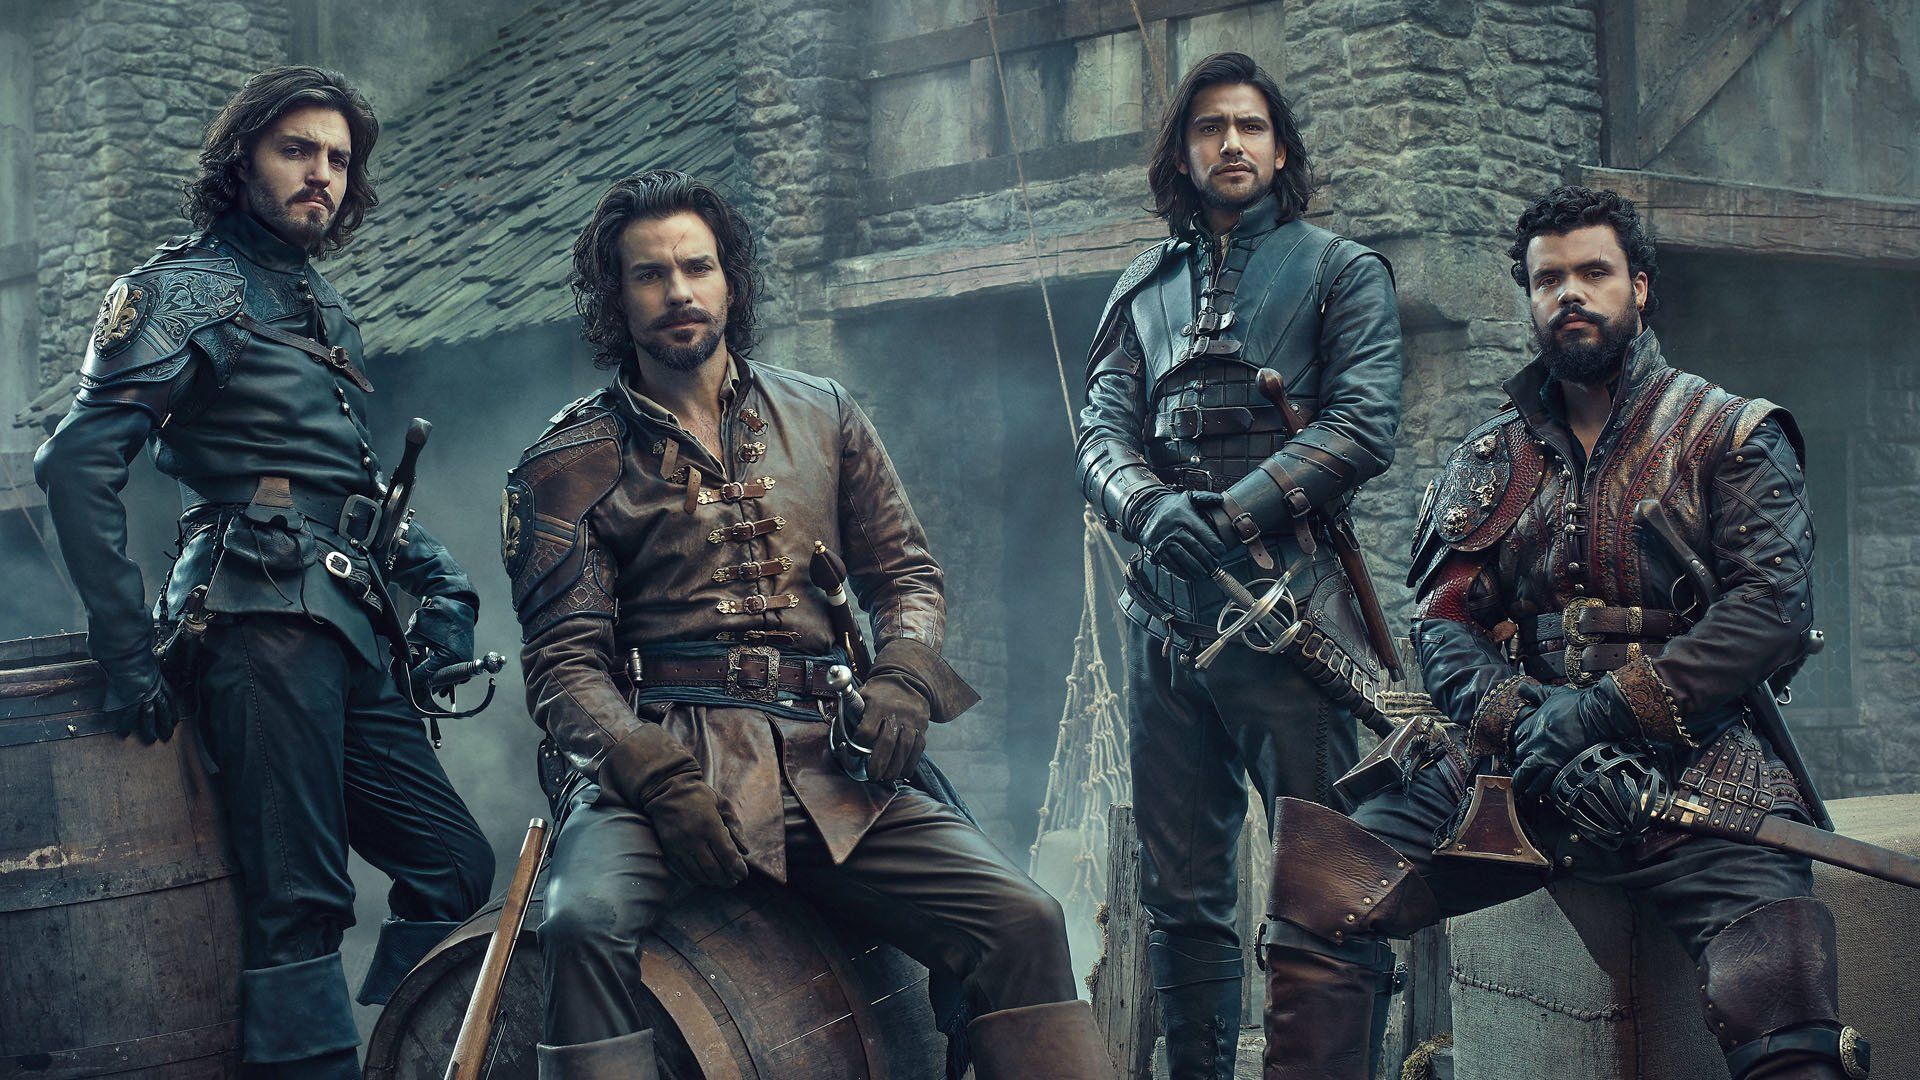 The Musketeers Wallpaper Free The Musketeers Background